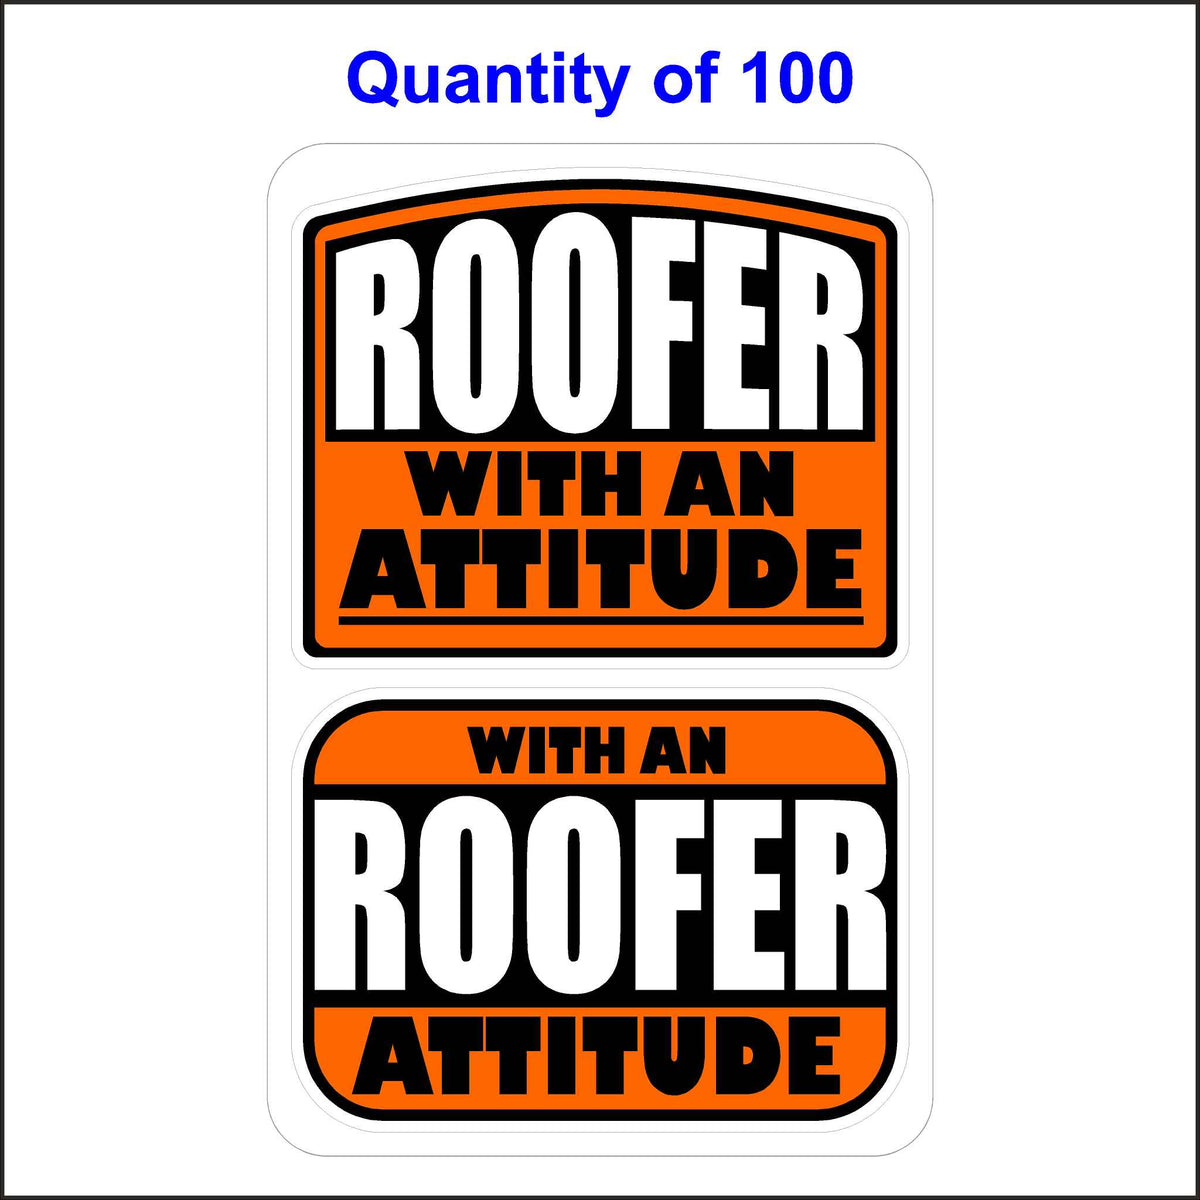 Roofer With An Attitude Stickers 100 Quantity.